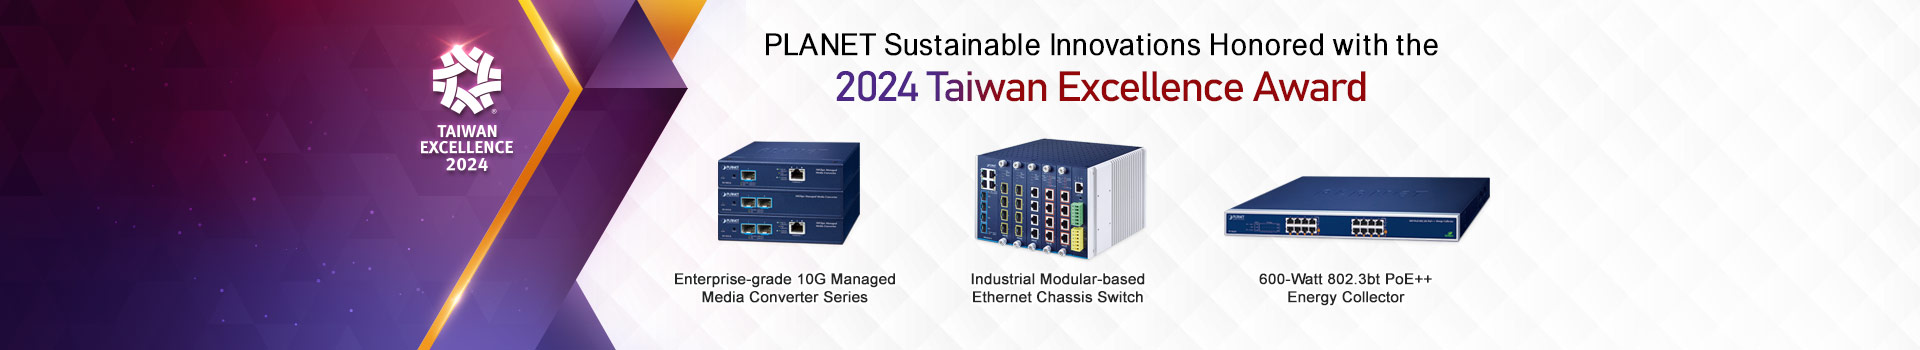 PLANET Sustainable Innovations Honored with the 2024 Taiwan Excellence Award